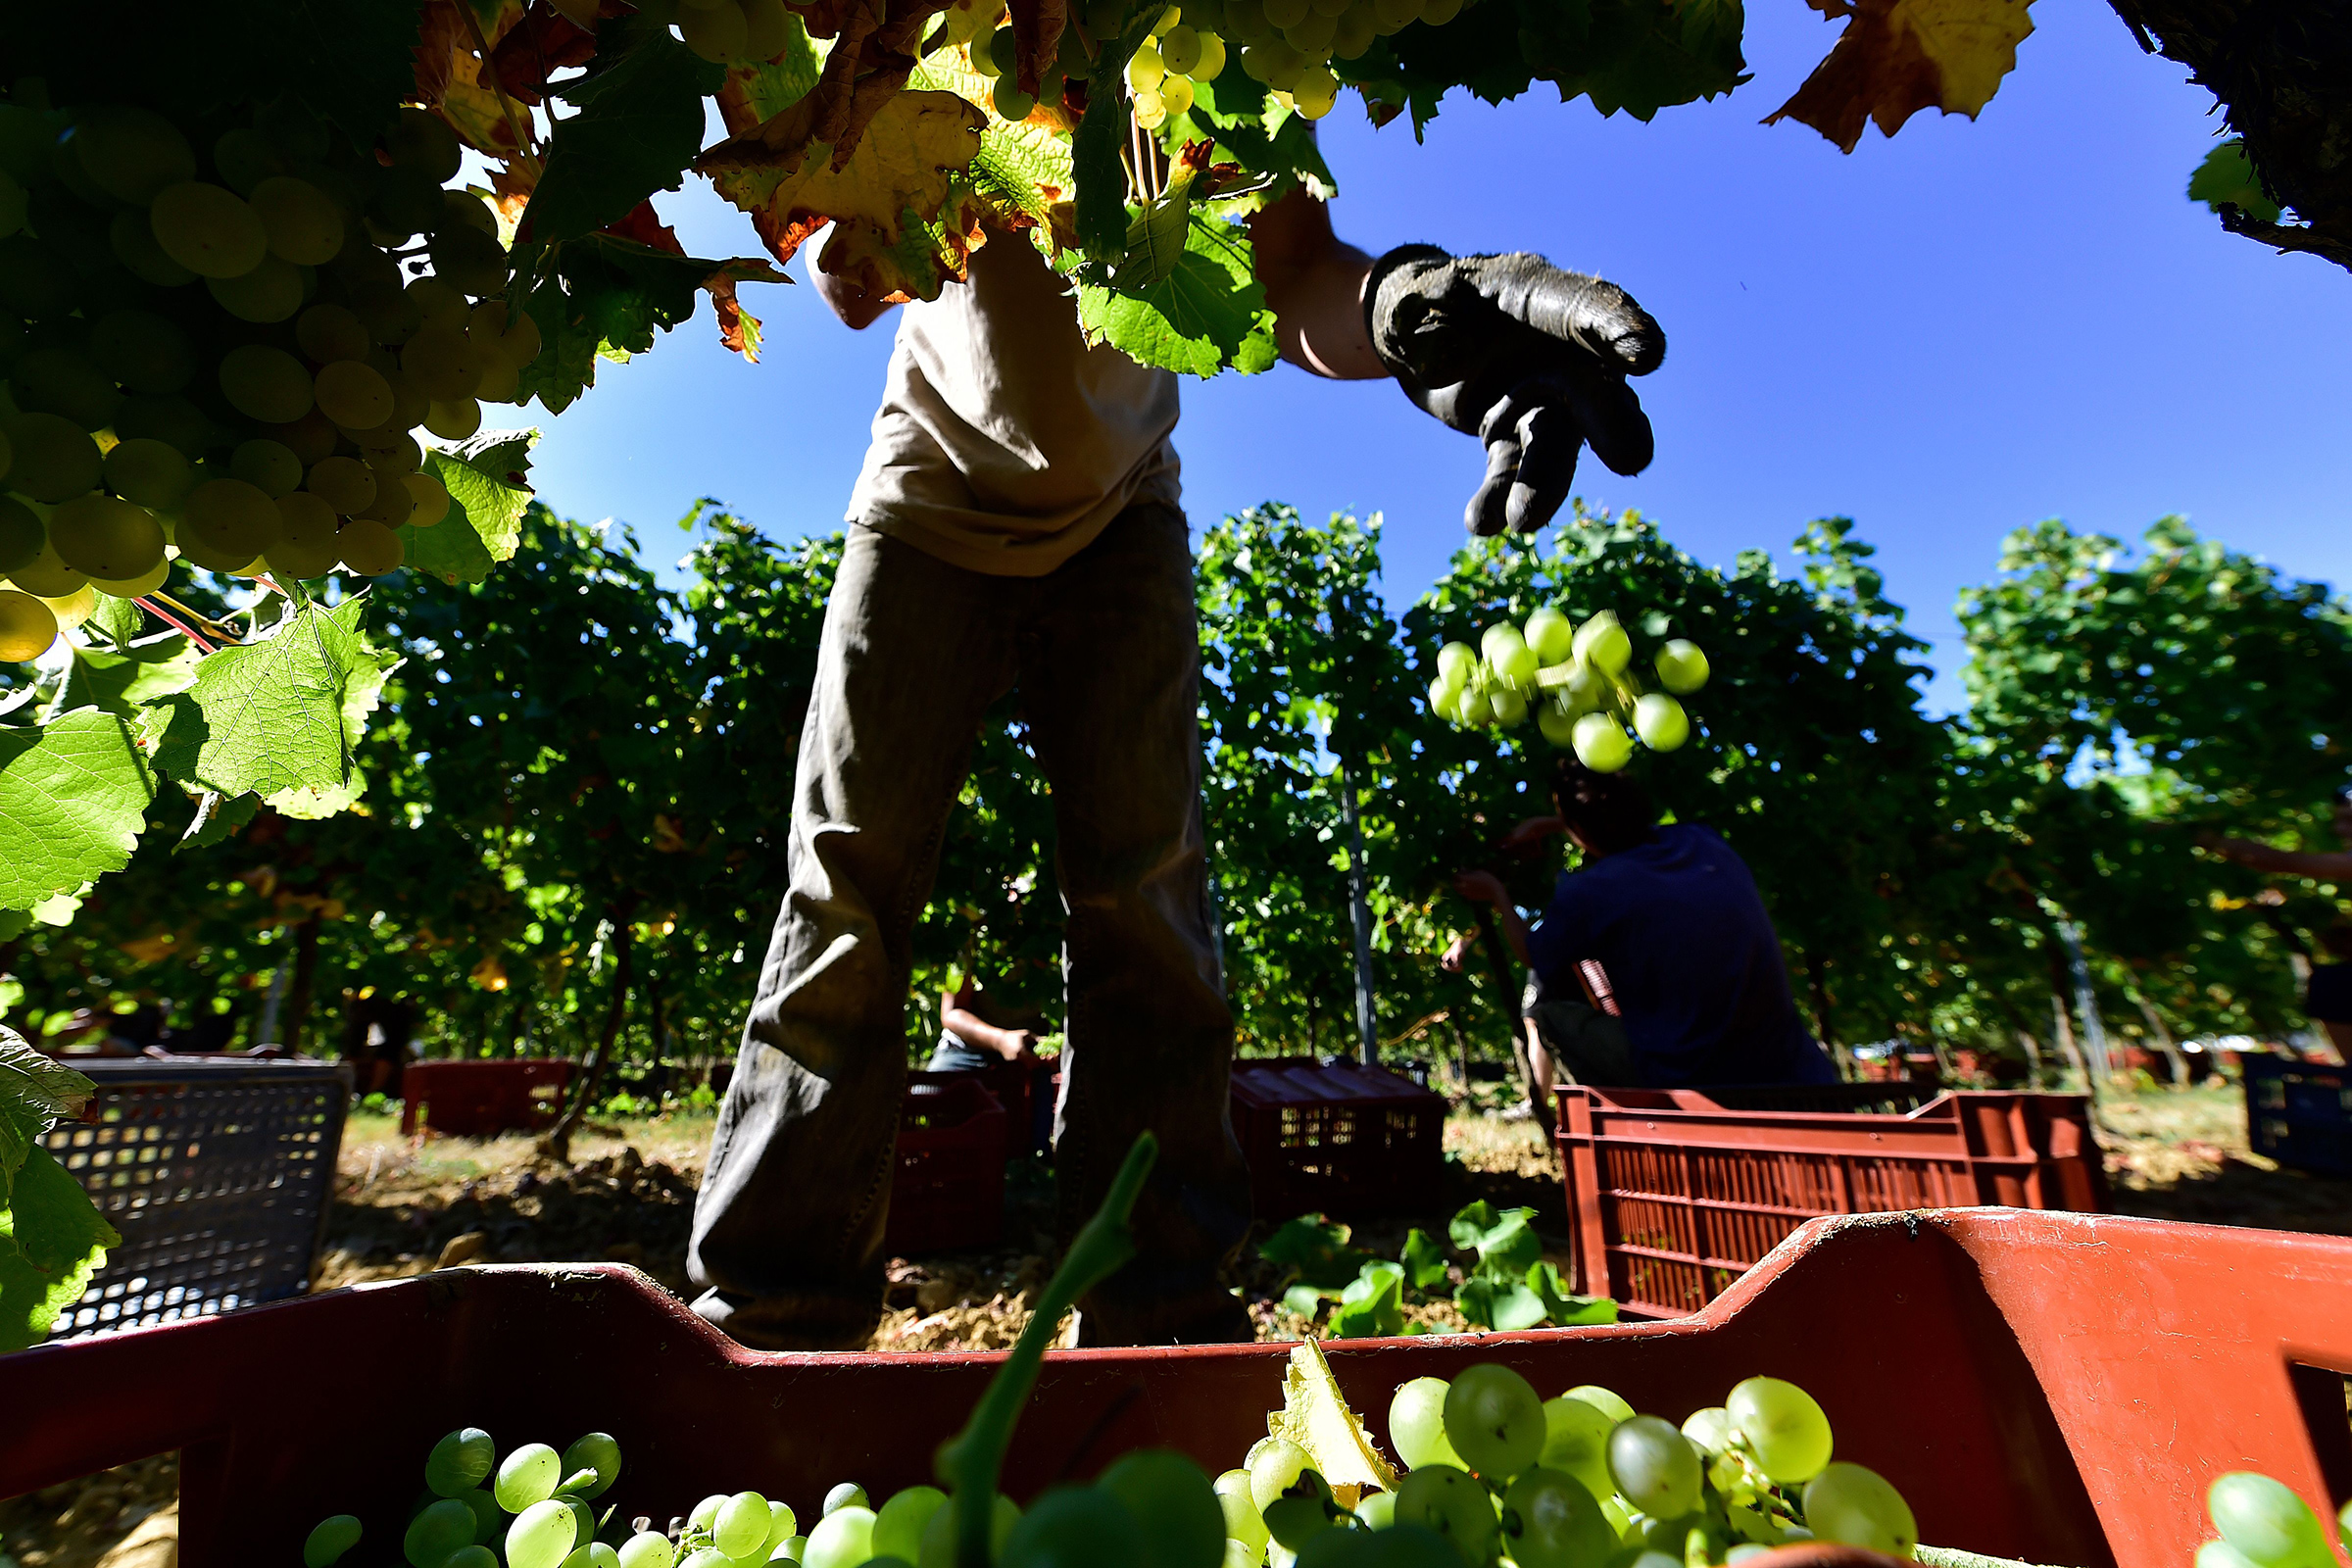 Workers collect grapes on Sept. 3, 2019 in a vineyard near Rauzan in the Entre-Deux-Mers region near Bordeaux, southwestern France